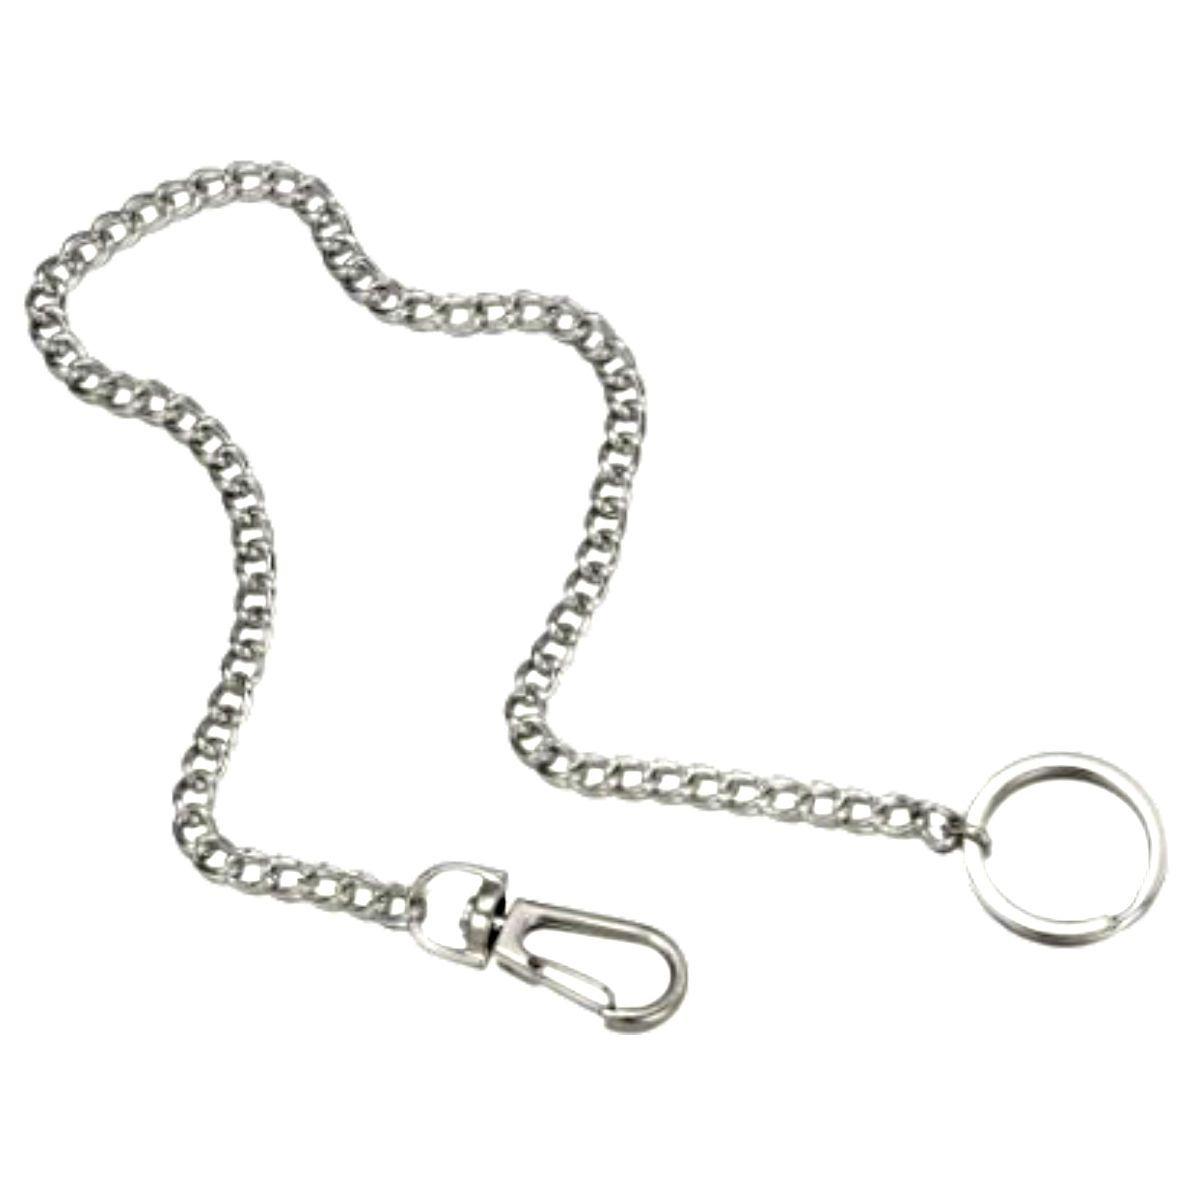 Wallet Keychain String, Stainless Steel, Unisex, 15 in, Silver Color - American Legend Rider